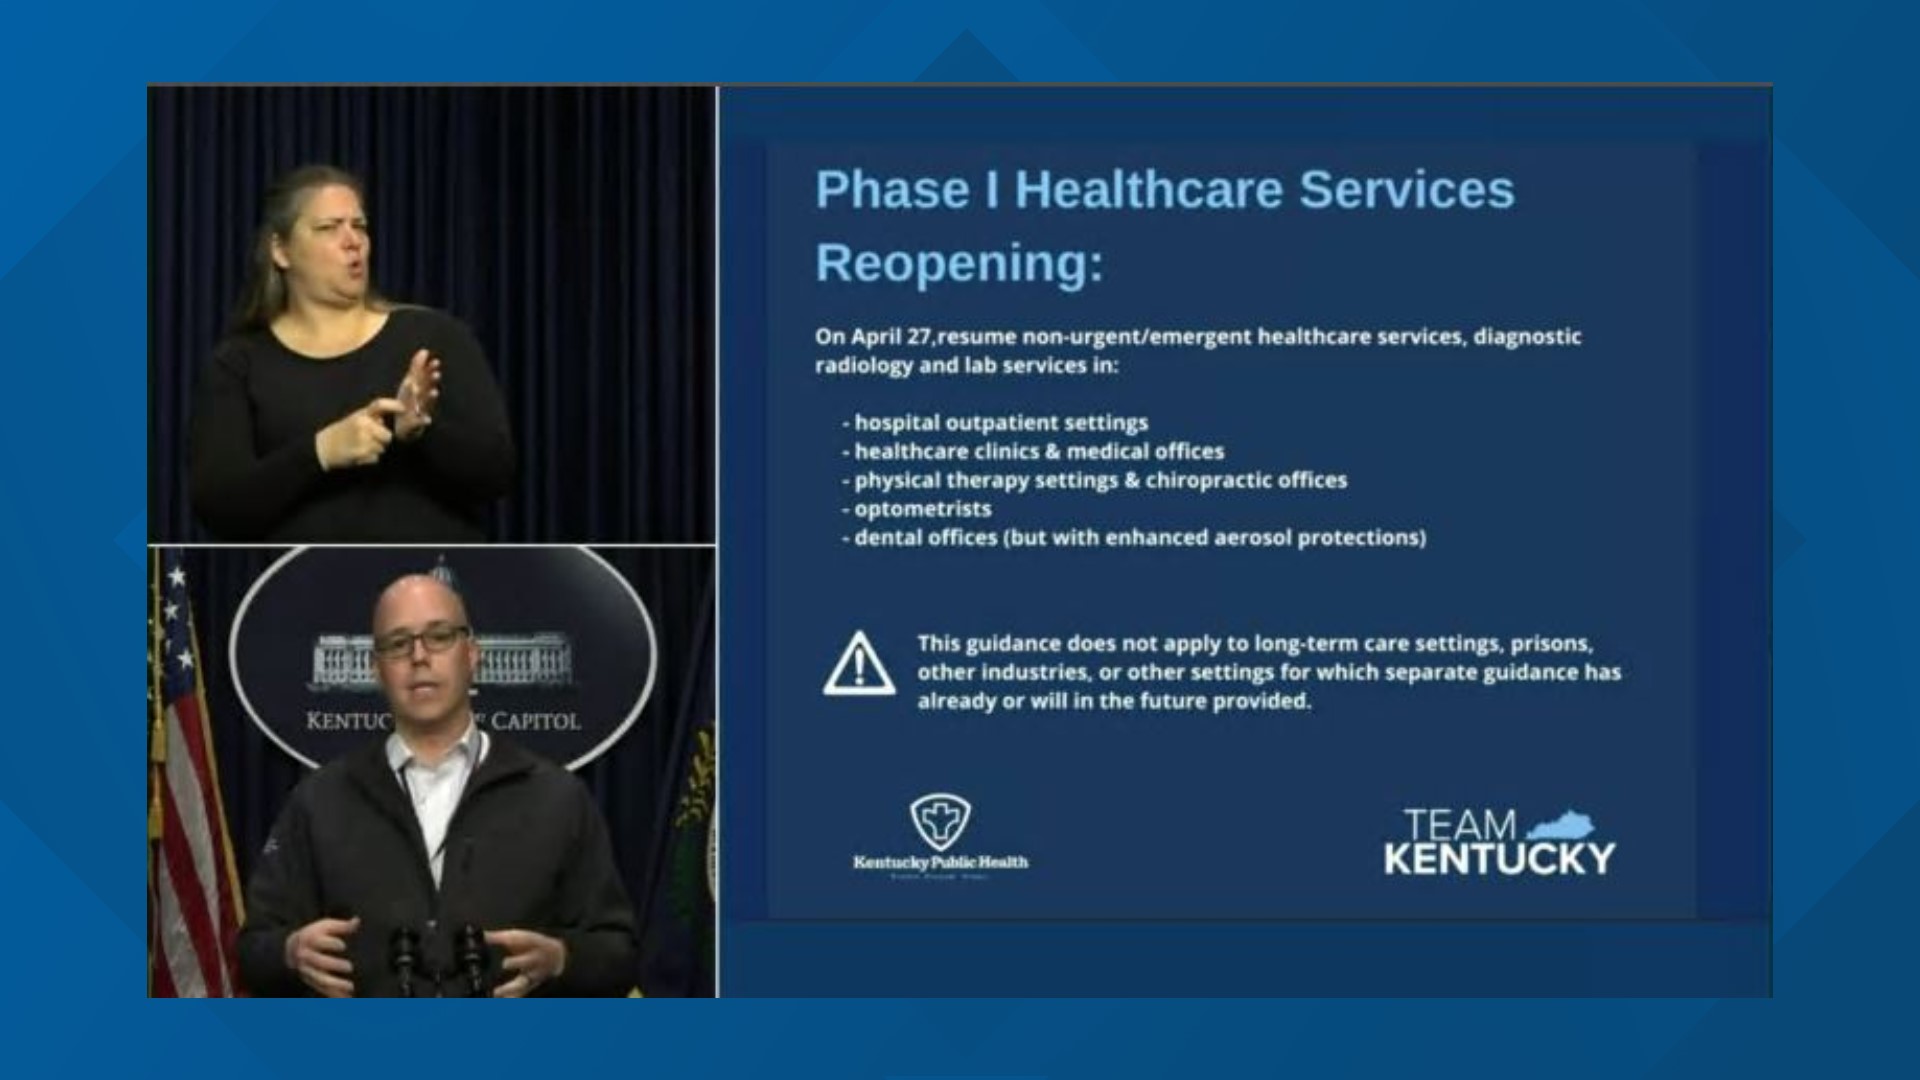 Governor Andy Beshear laid out more specifics and guidelines for limited opening of some healthcare services across Kentucky.